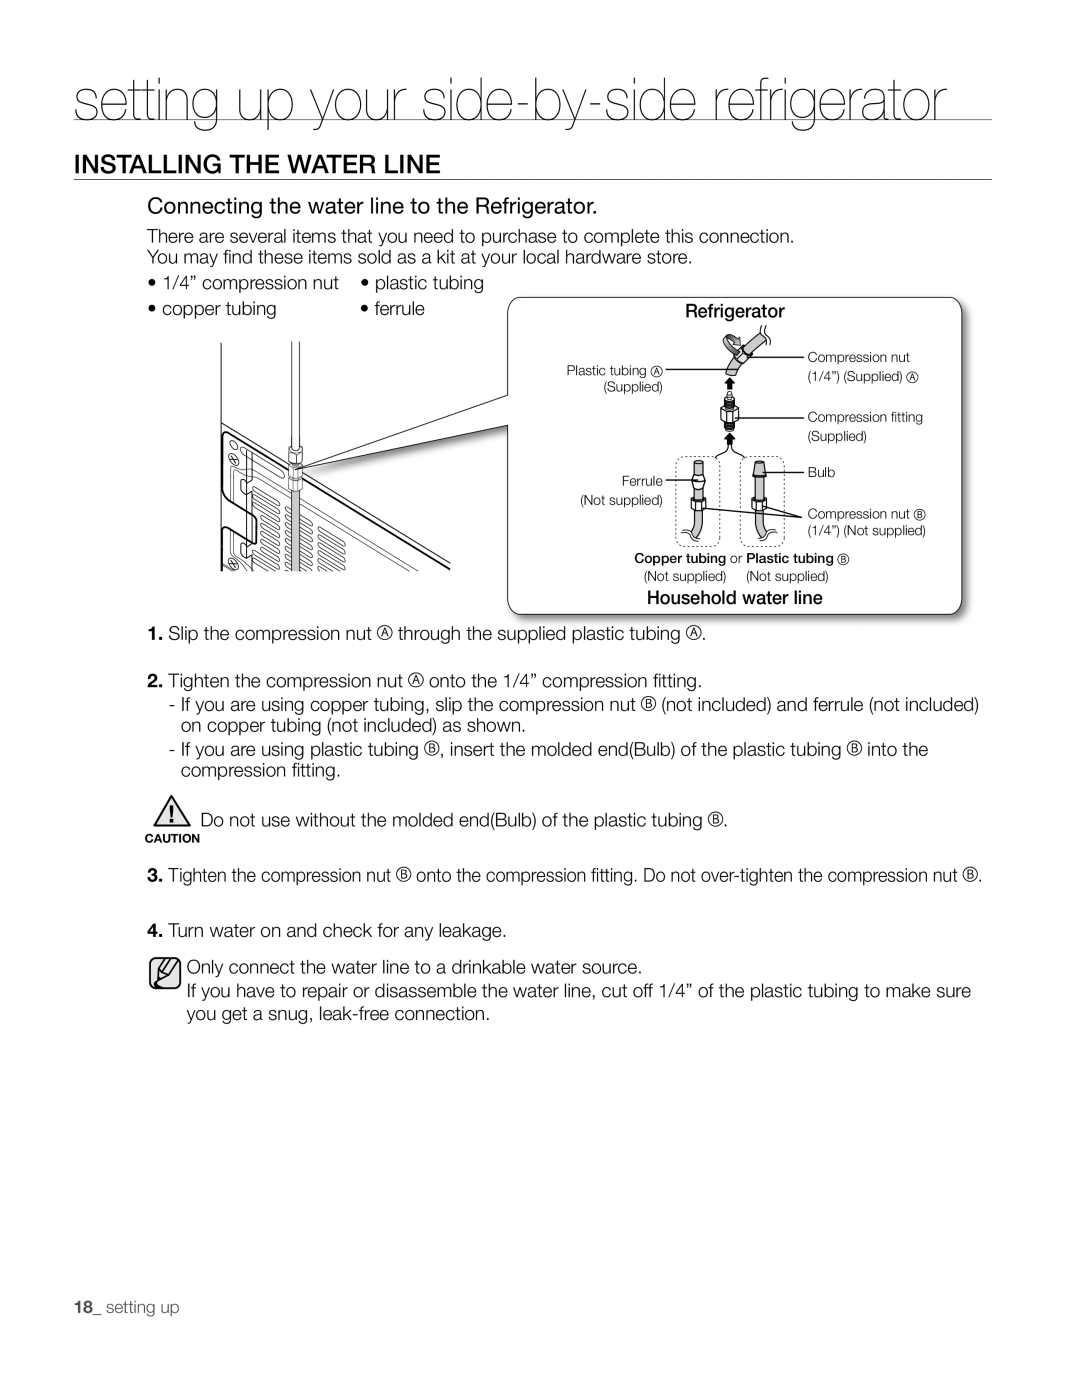 Samsung RS267TDBP user manual instALLinG tHE wAtER LinE, setting up your side-by-side refrigerator 